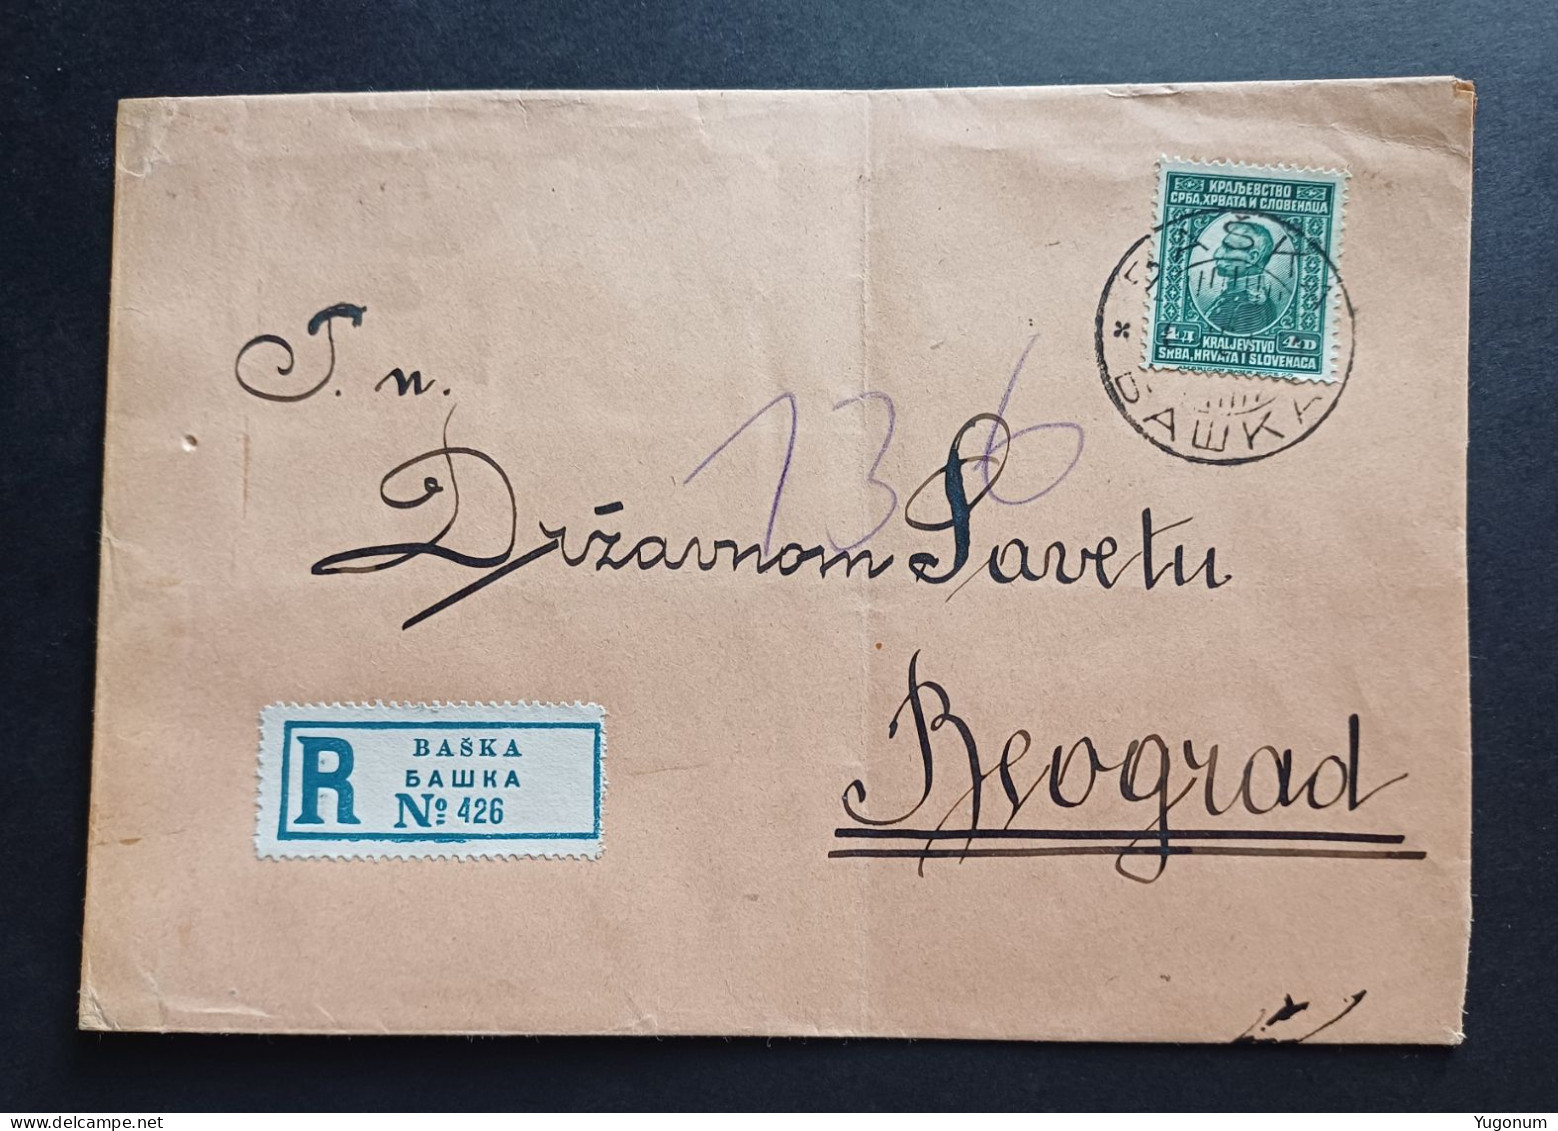 Yugoslavia Kingdom , Croatia 1920's R Letter With Stamp And R Label BAŠKA (No 3108) - Lettres & Documents